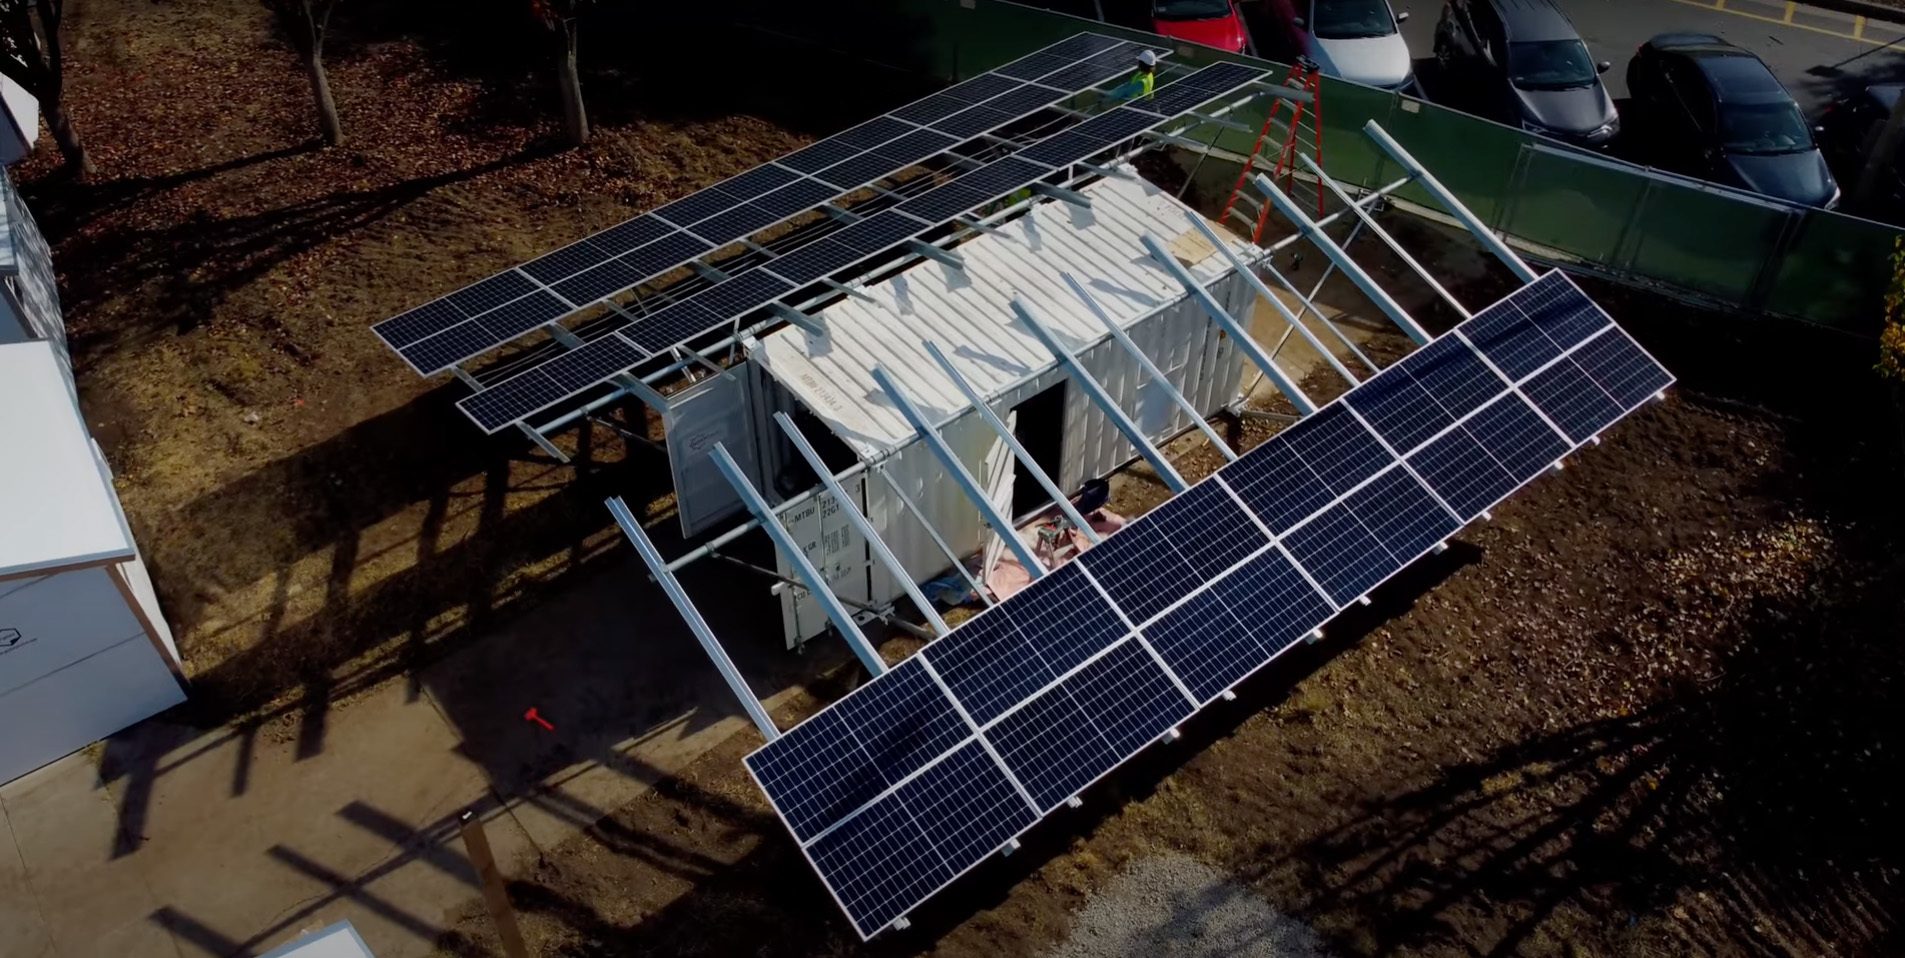 Microgrids in California shelter community